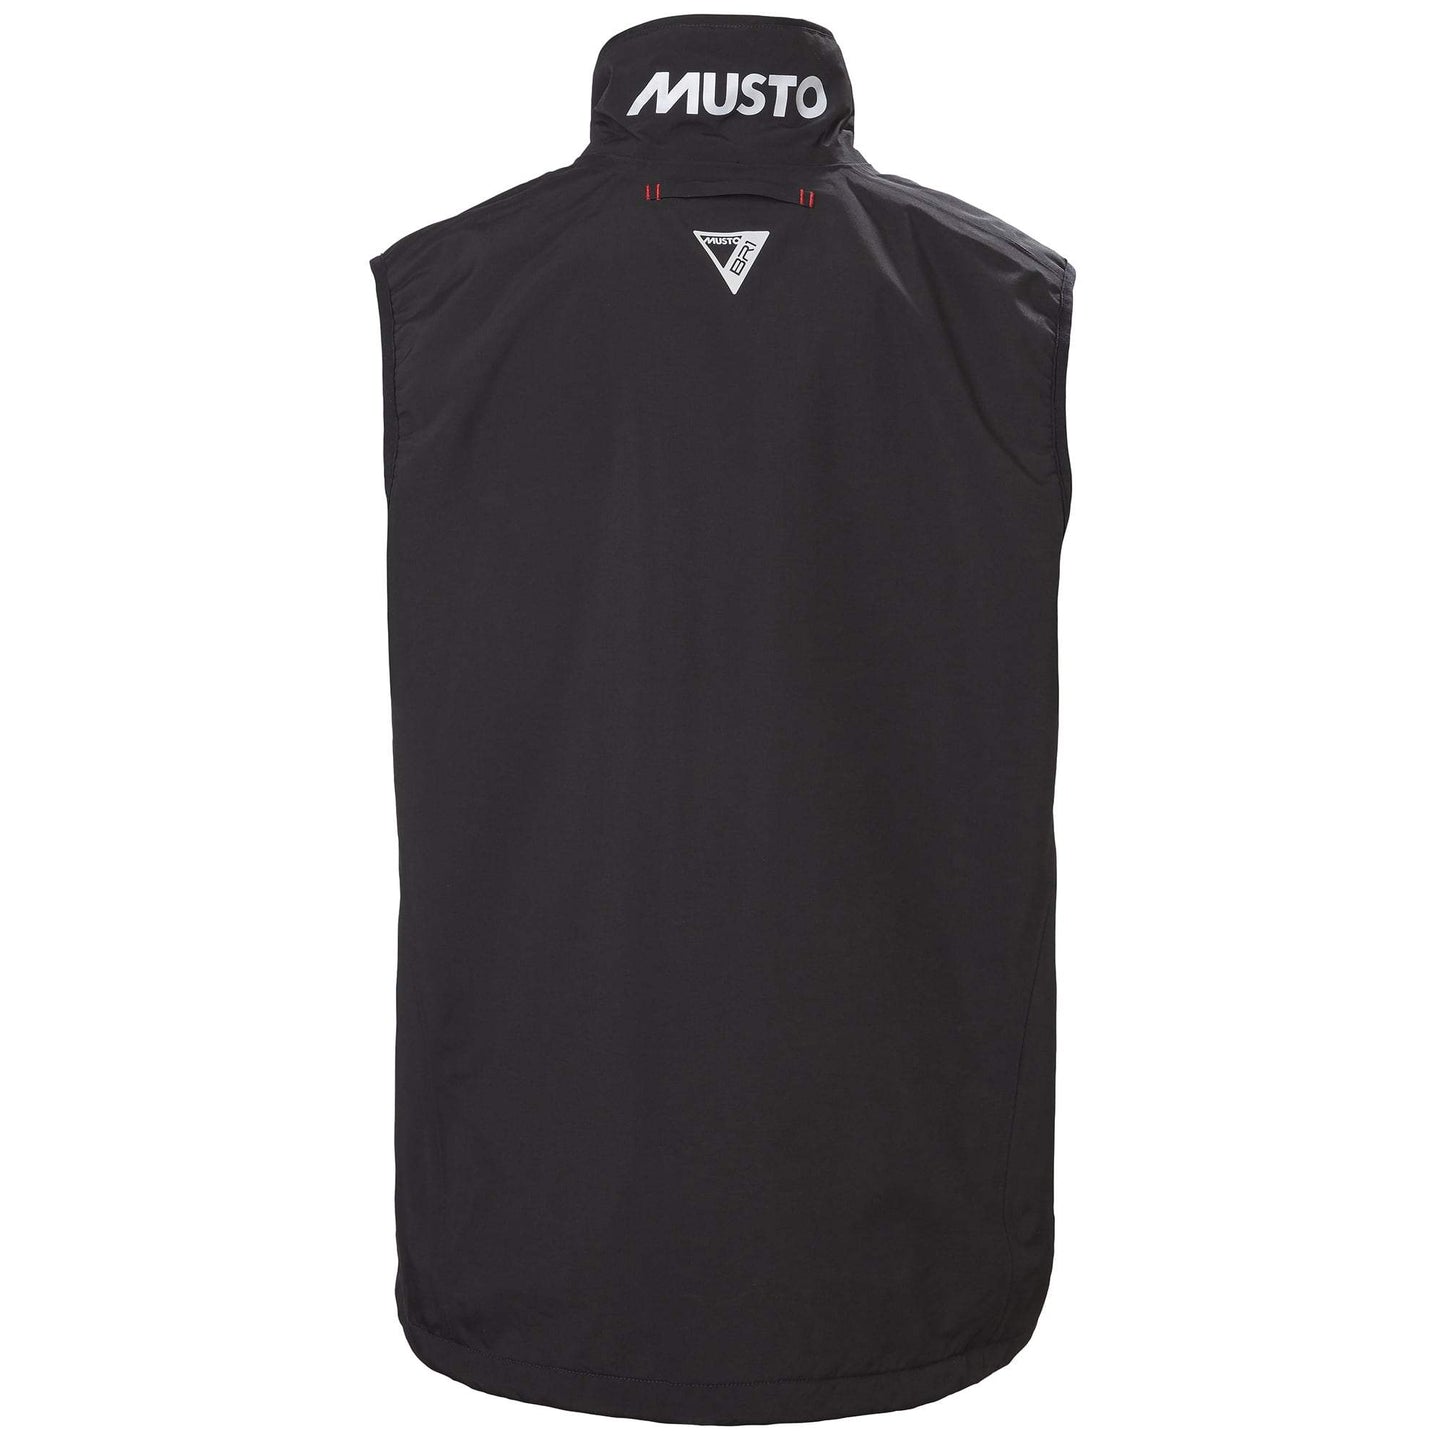 Corsica 2.0 Gilet by Musto - The Luxury Promotional Gifts Company Limited